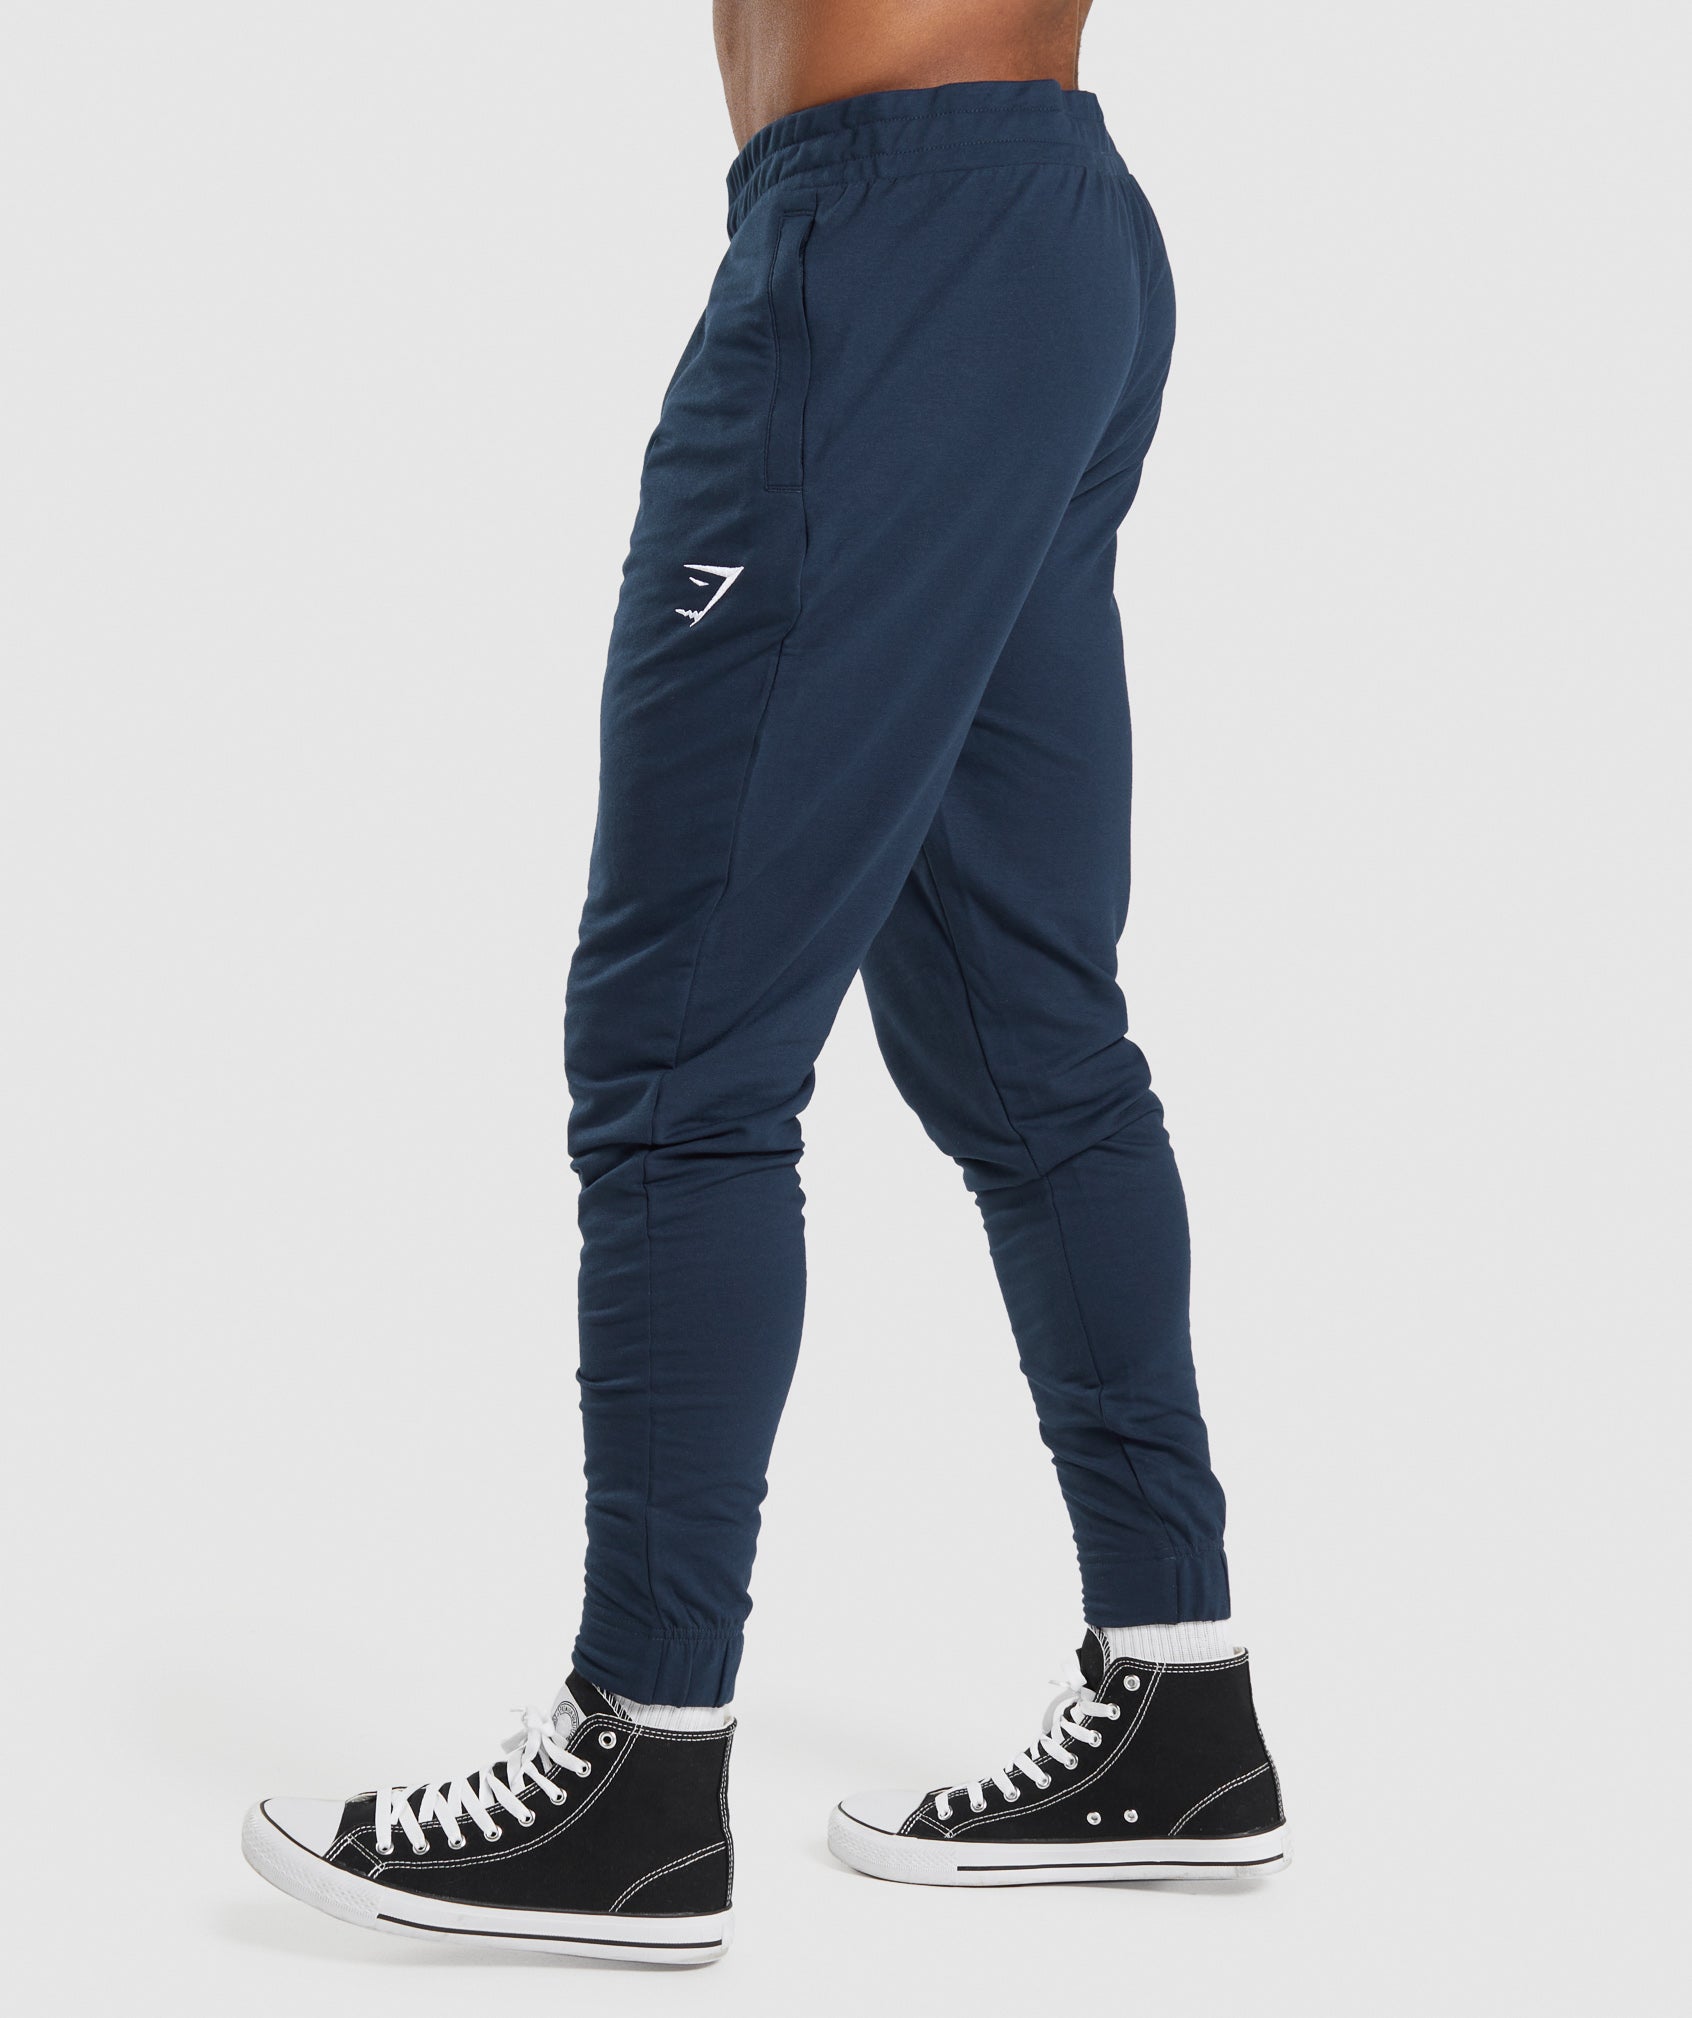 Critical Pant in Navy - view 3